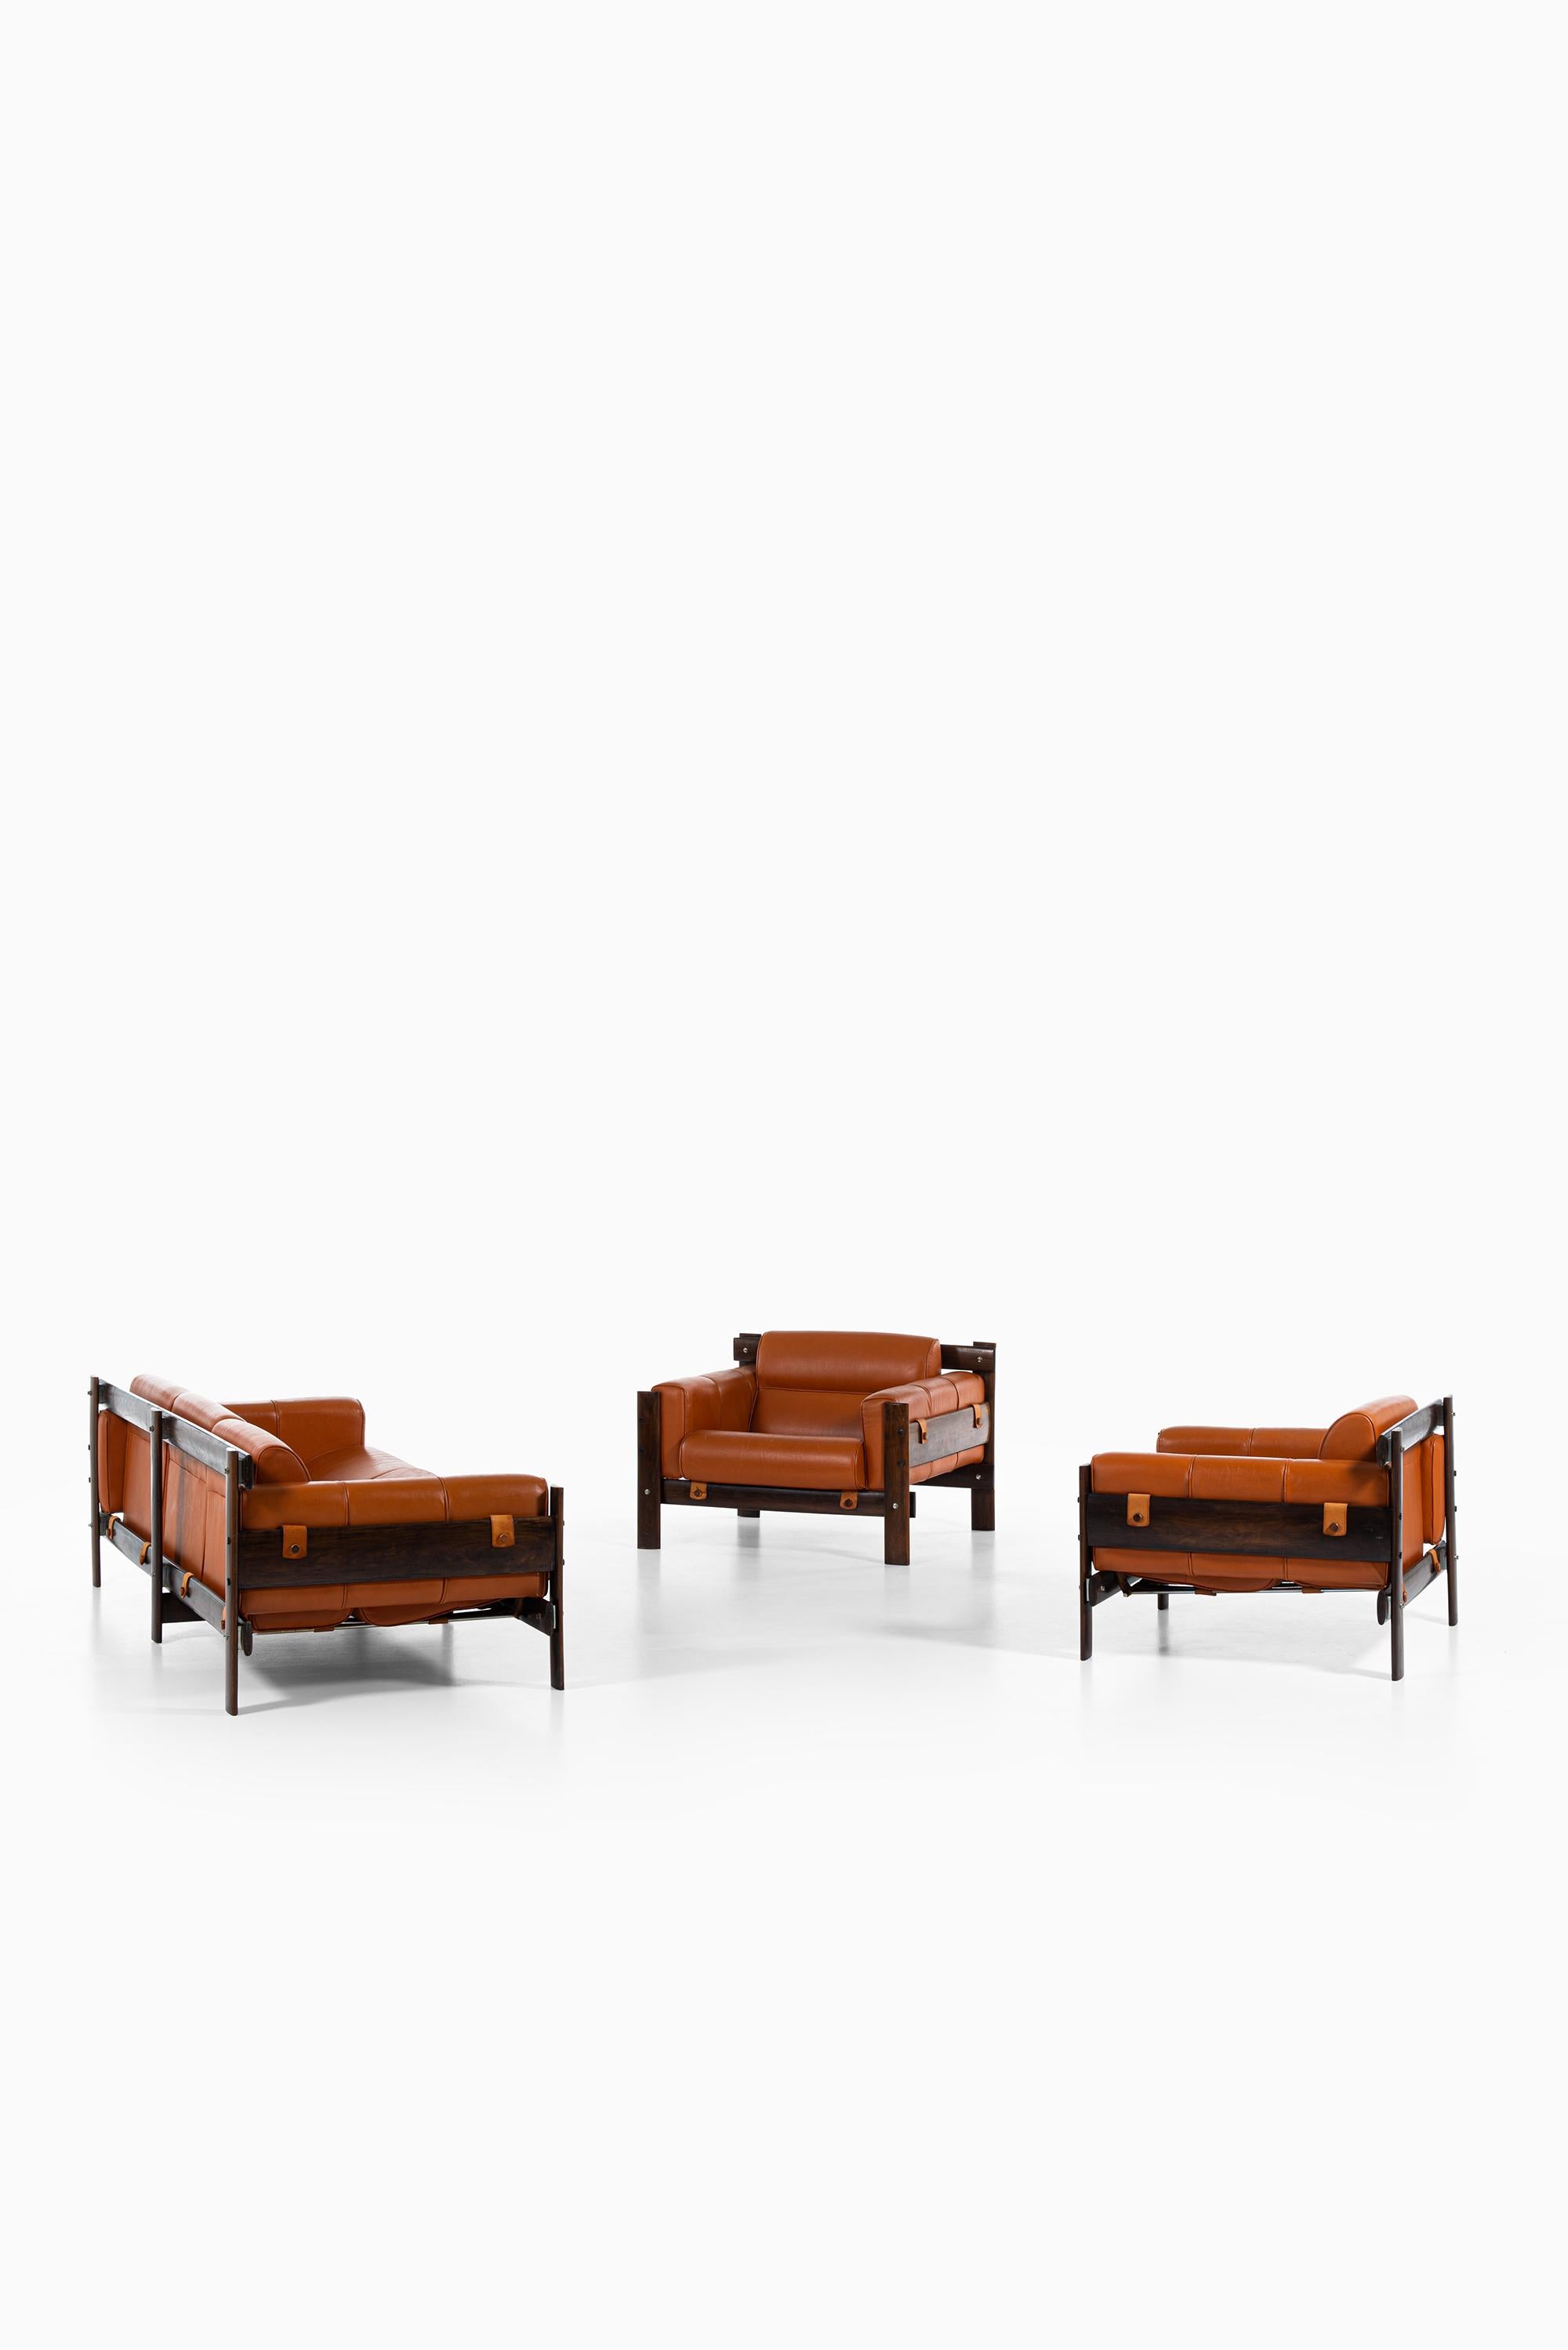 Percival Lafer Easy Chairs in Rosewood and Leather by Lafer MP in Brazil 1